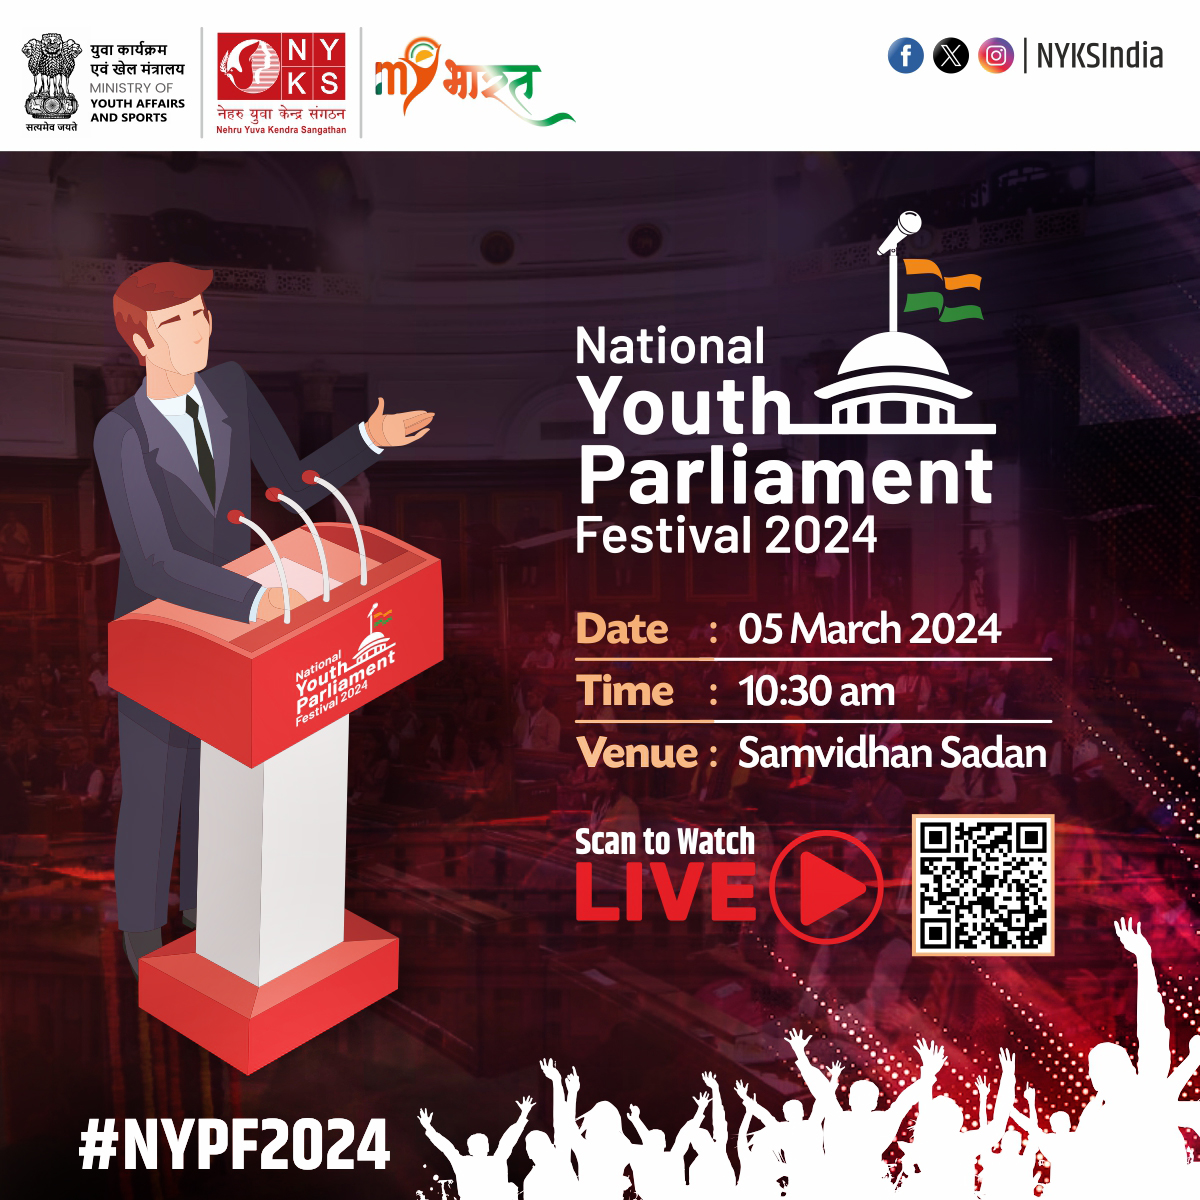 Get ready for the 5th National Youth Parliament Festival 2024! Join us in uplifting the voices of youth and empowering them to actively contribute to the transformation of our nation. Watch LIVE - youtube.com/watch?v=IR1iZf… #NYPF2024 #YouthEmpowerment #NYKS #Youth @LokSabha_PRIDE